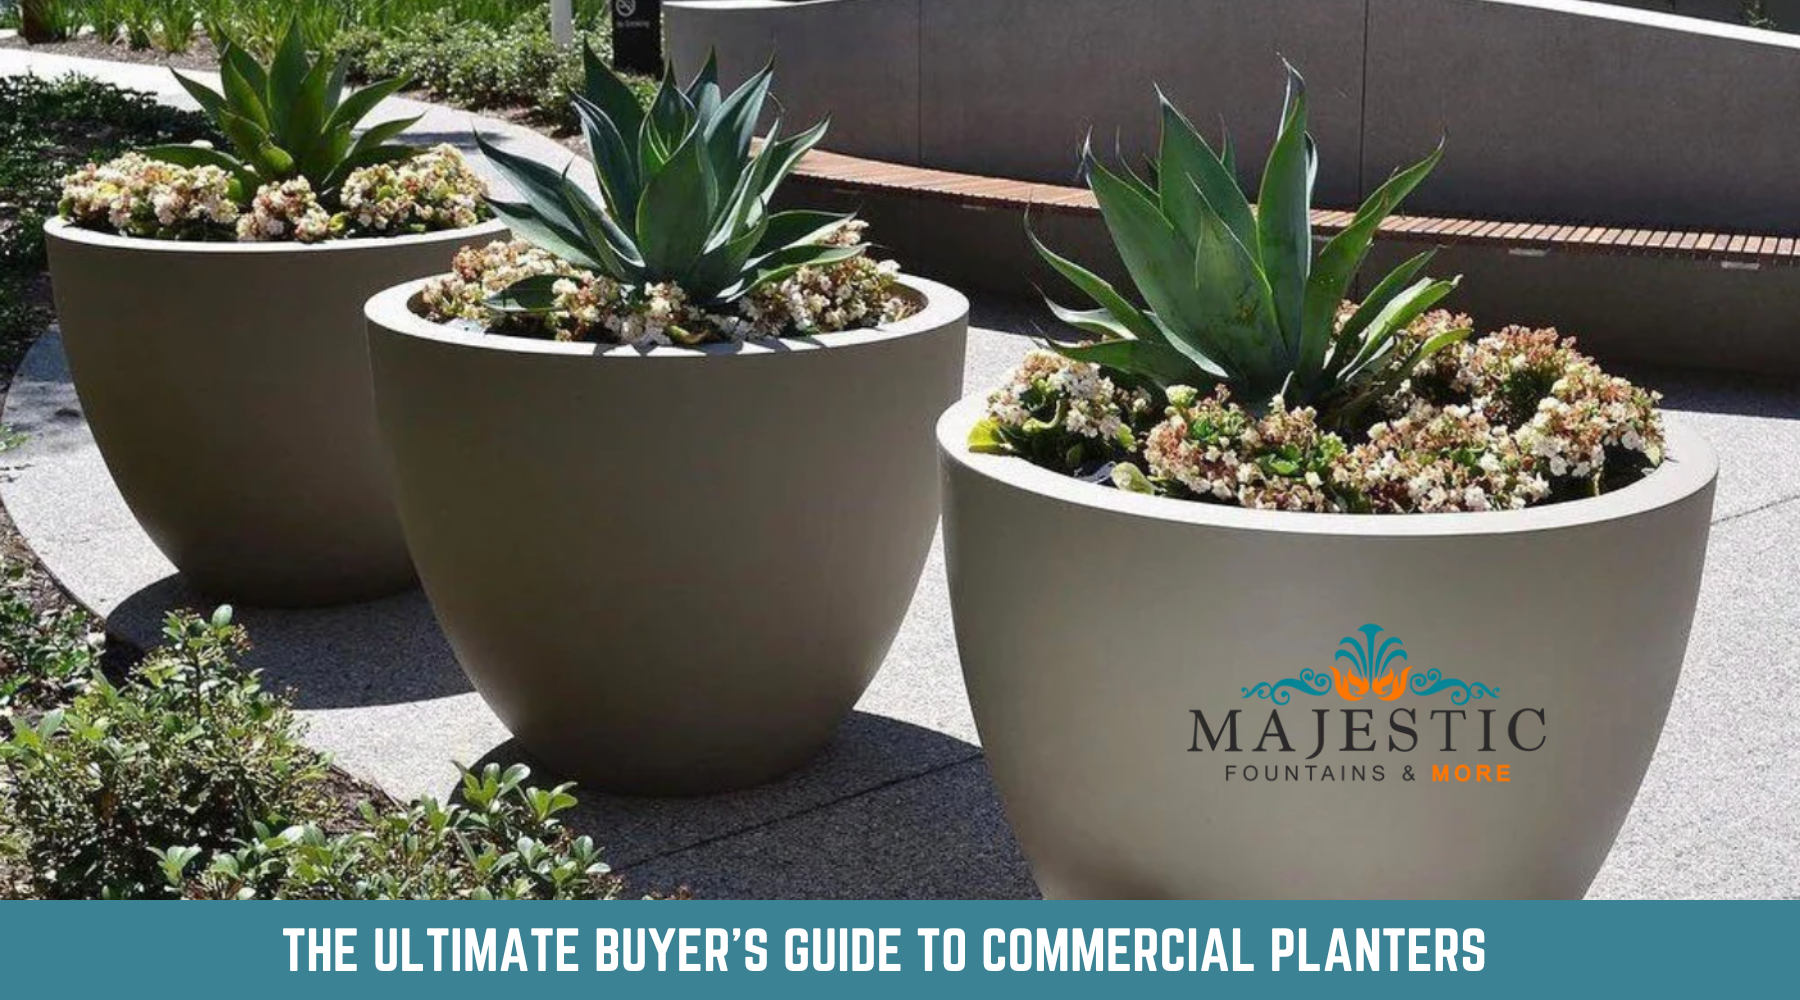 The Ultimate Buyer's Guide to Commercial Planters